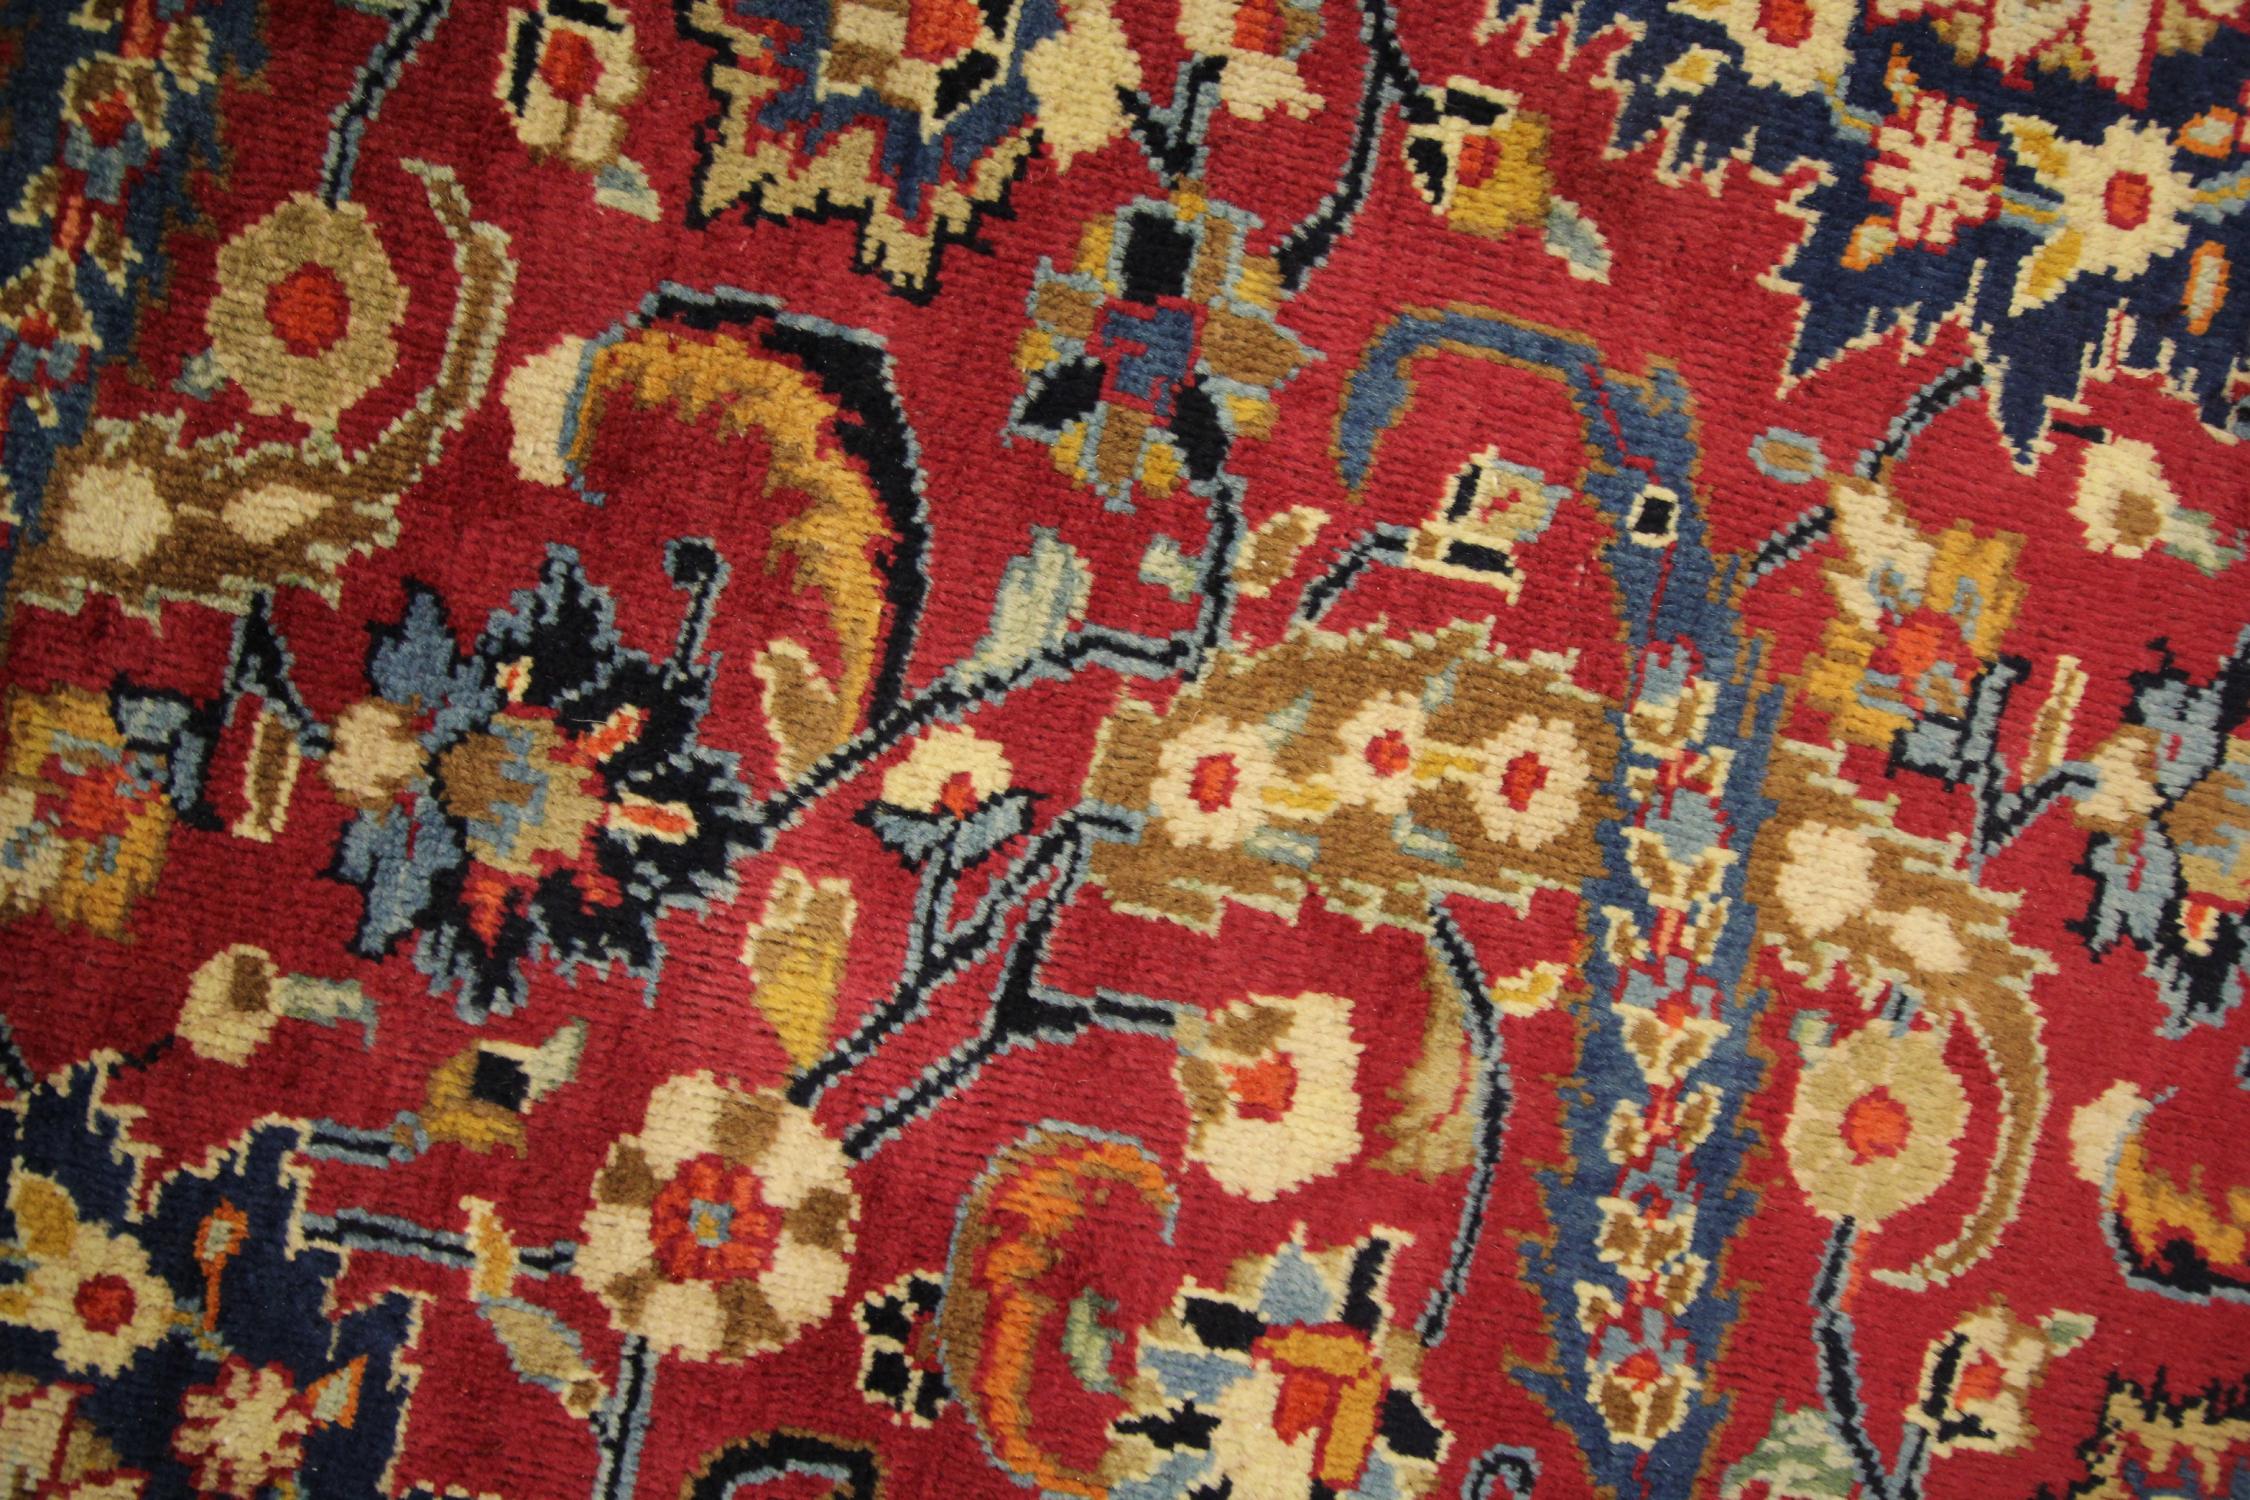 Antique Rugs Crimson Red Handmade Carpet, All over Turkish Rugs for Sale For Sale 3